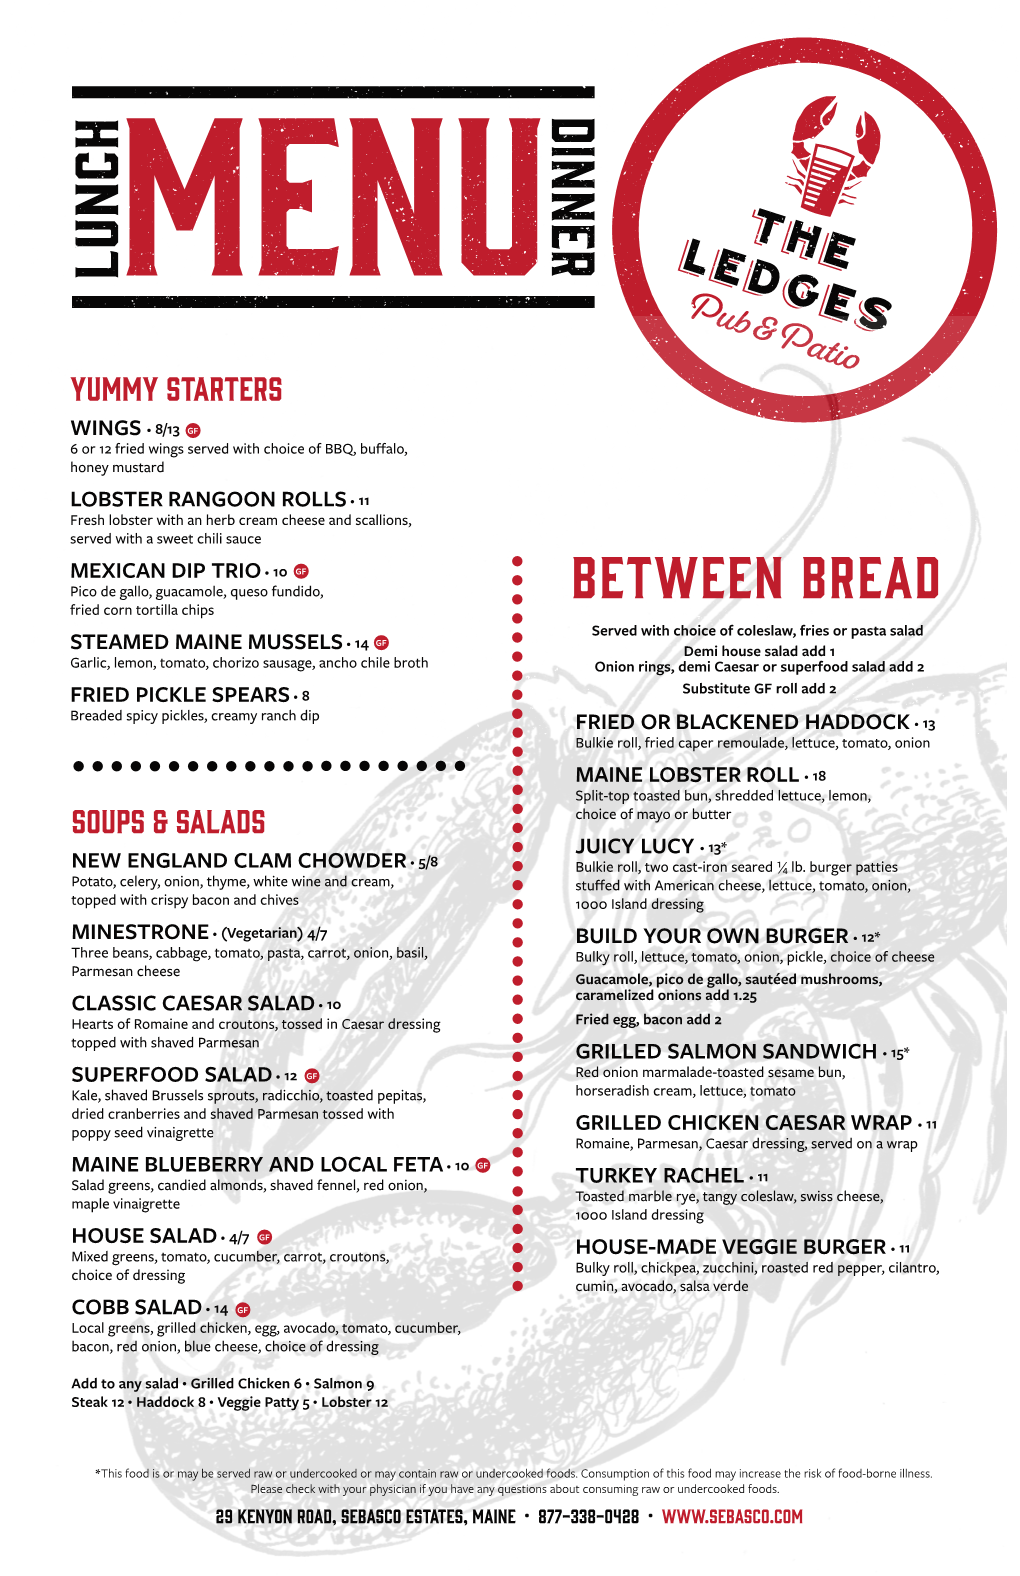 Browse a Sample Menu from the Ledges Pub